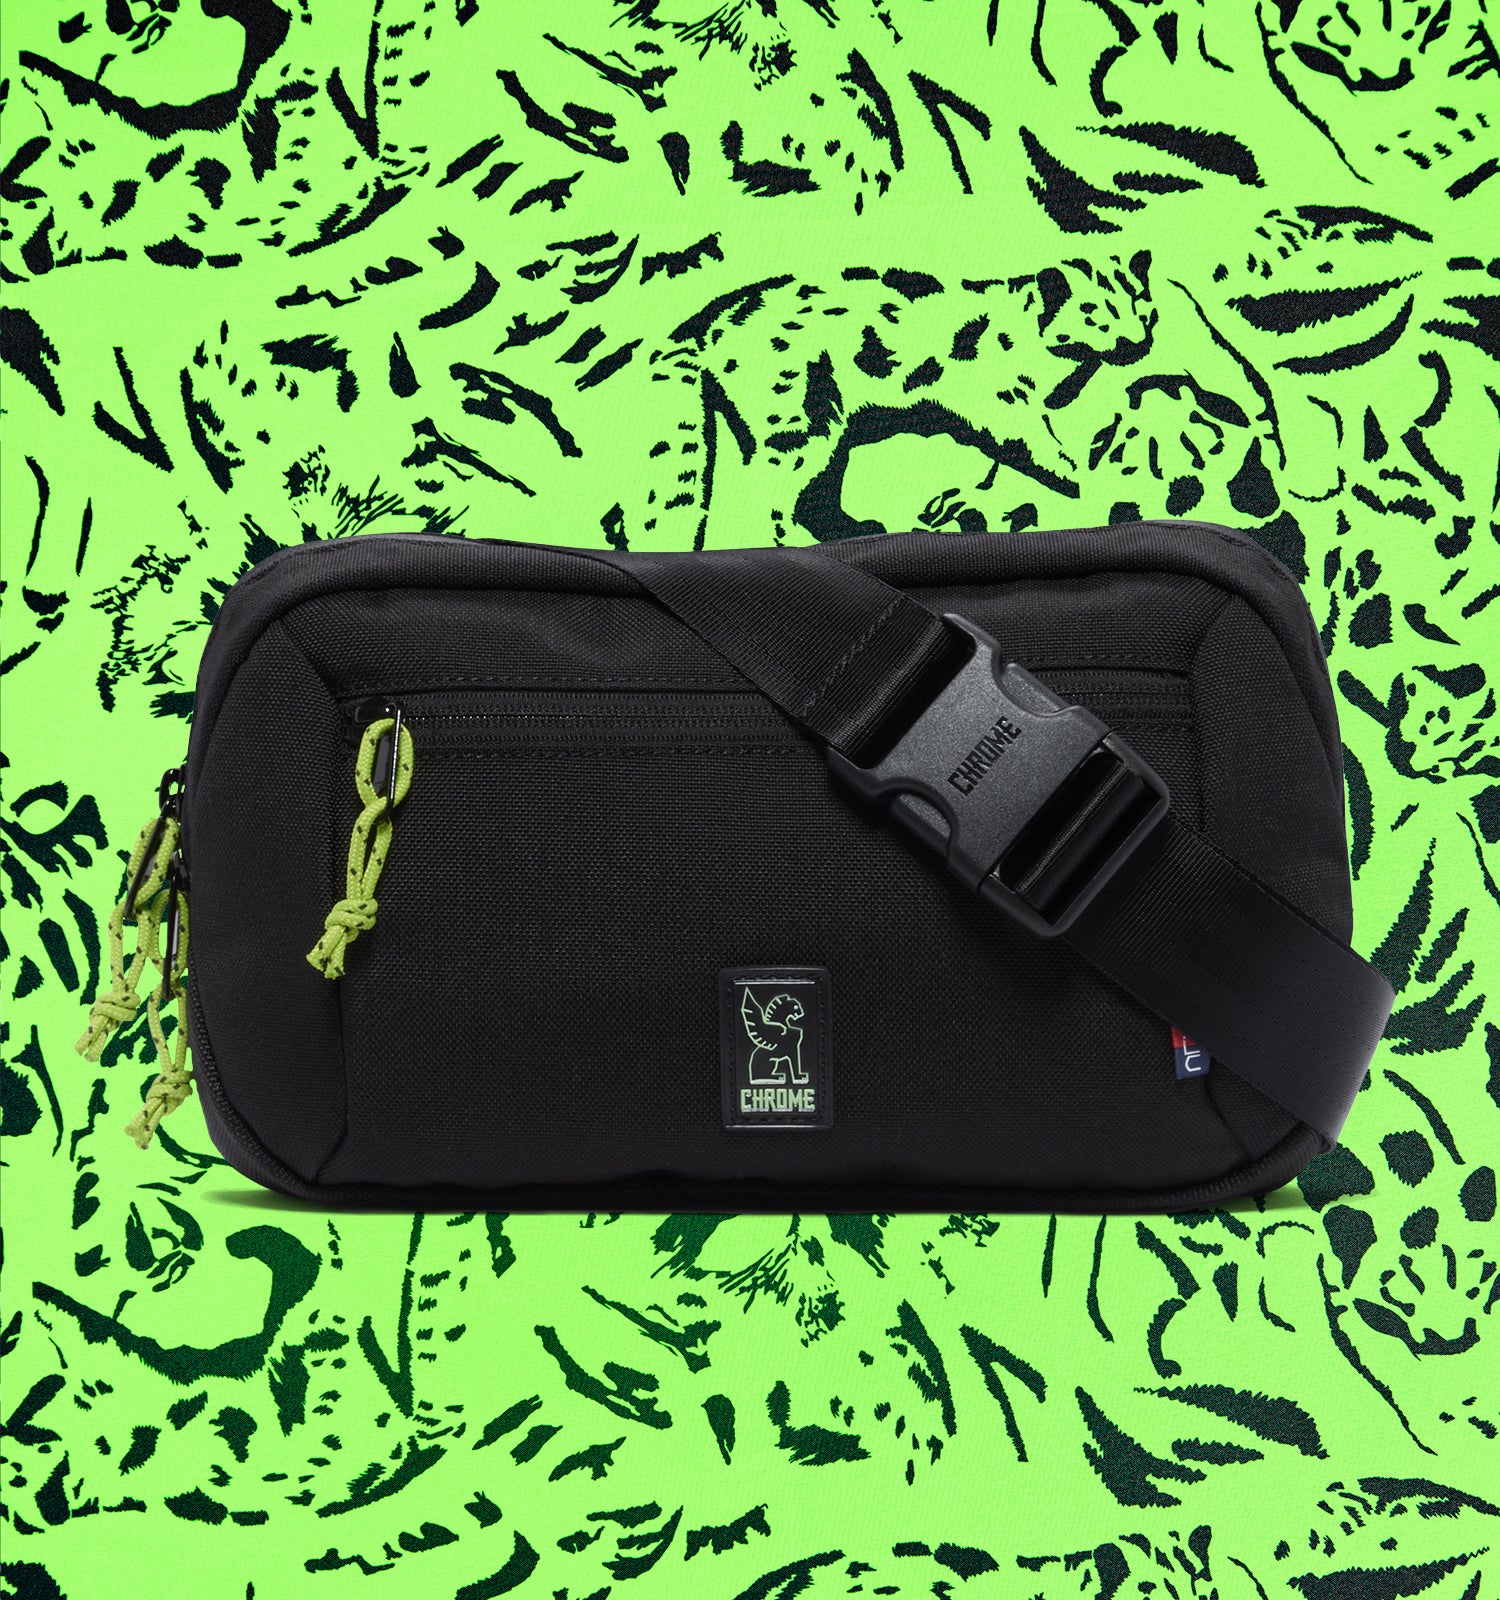 Chrome X ALC collab on the Ziptop Waistpack in the green black color